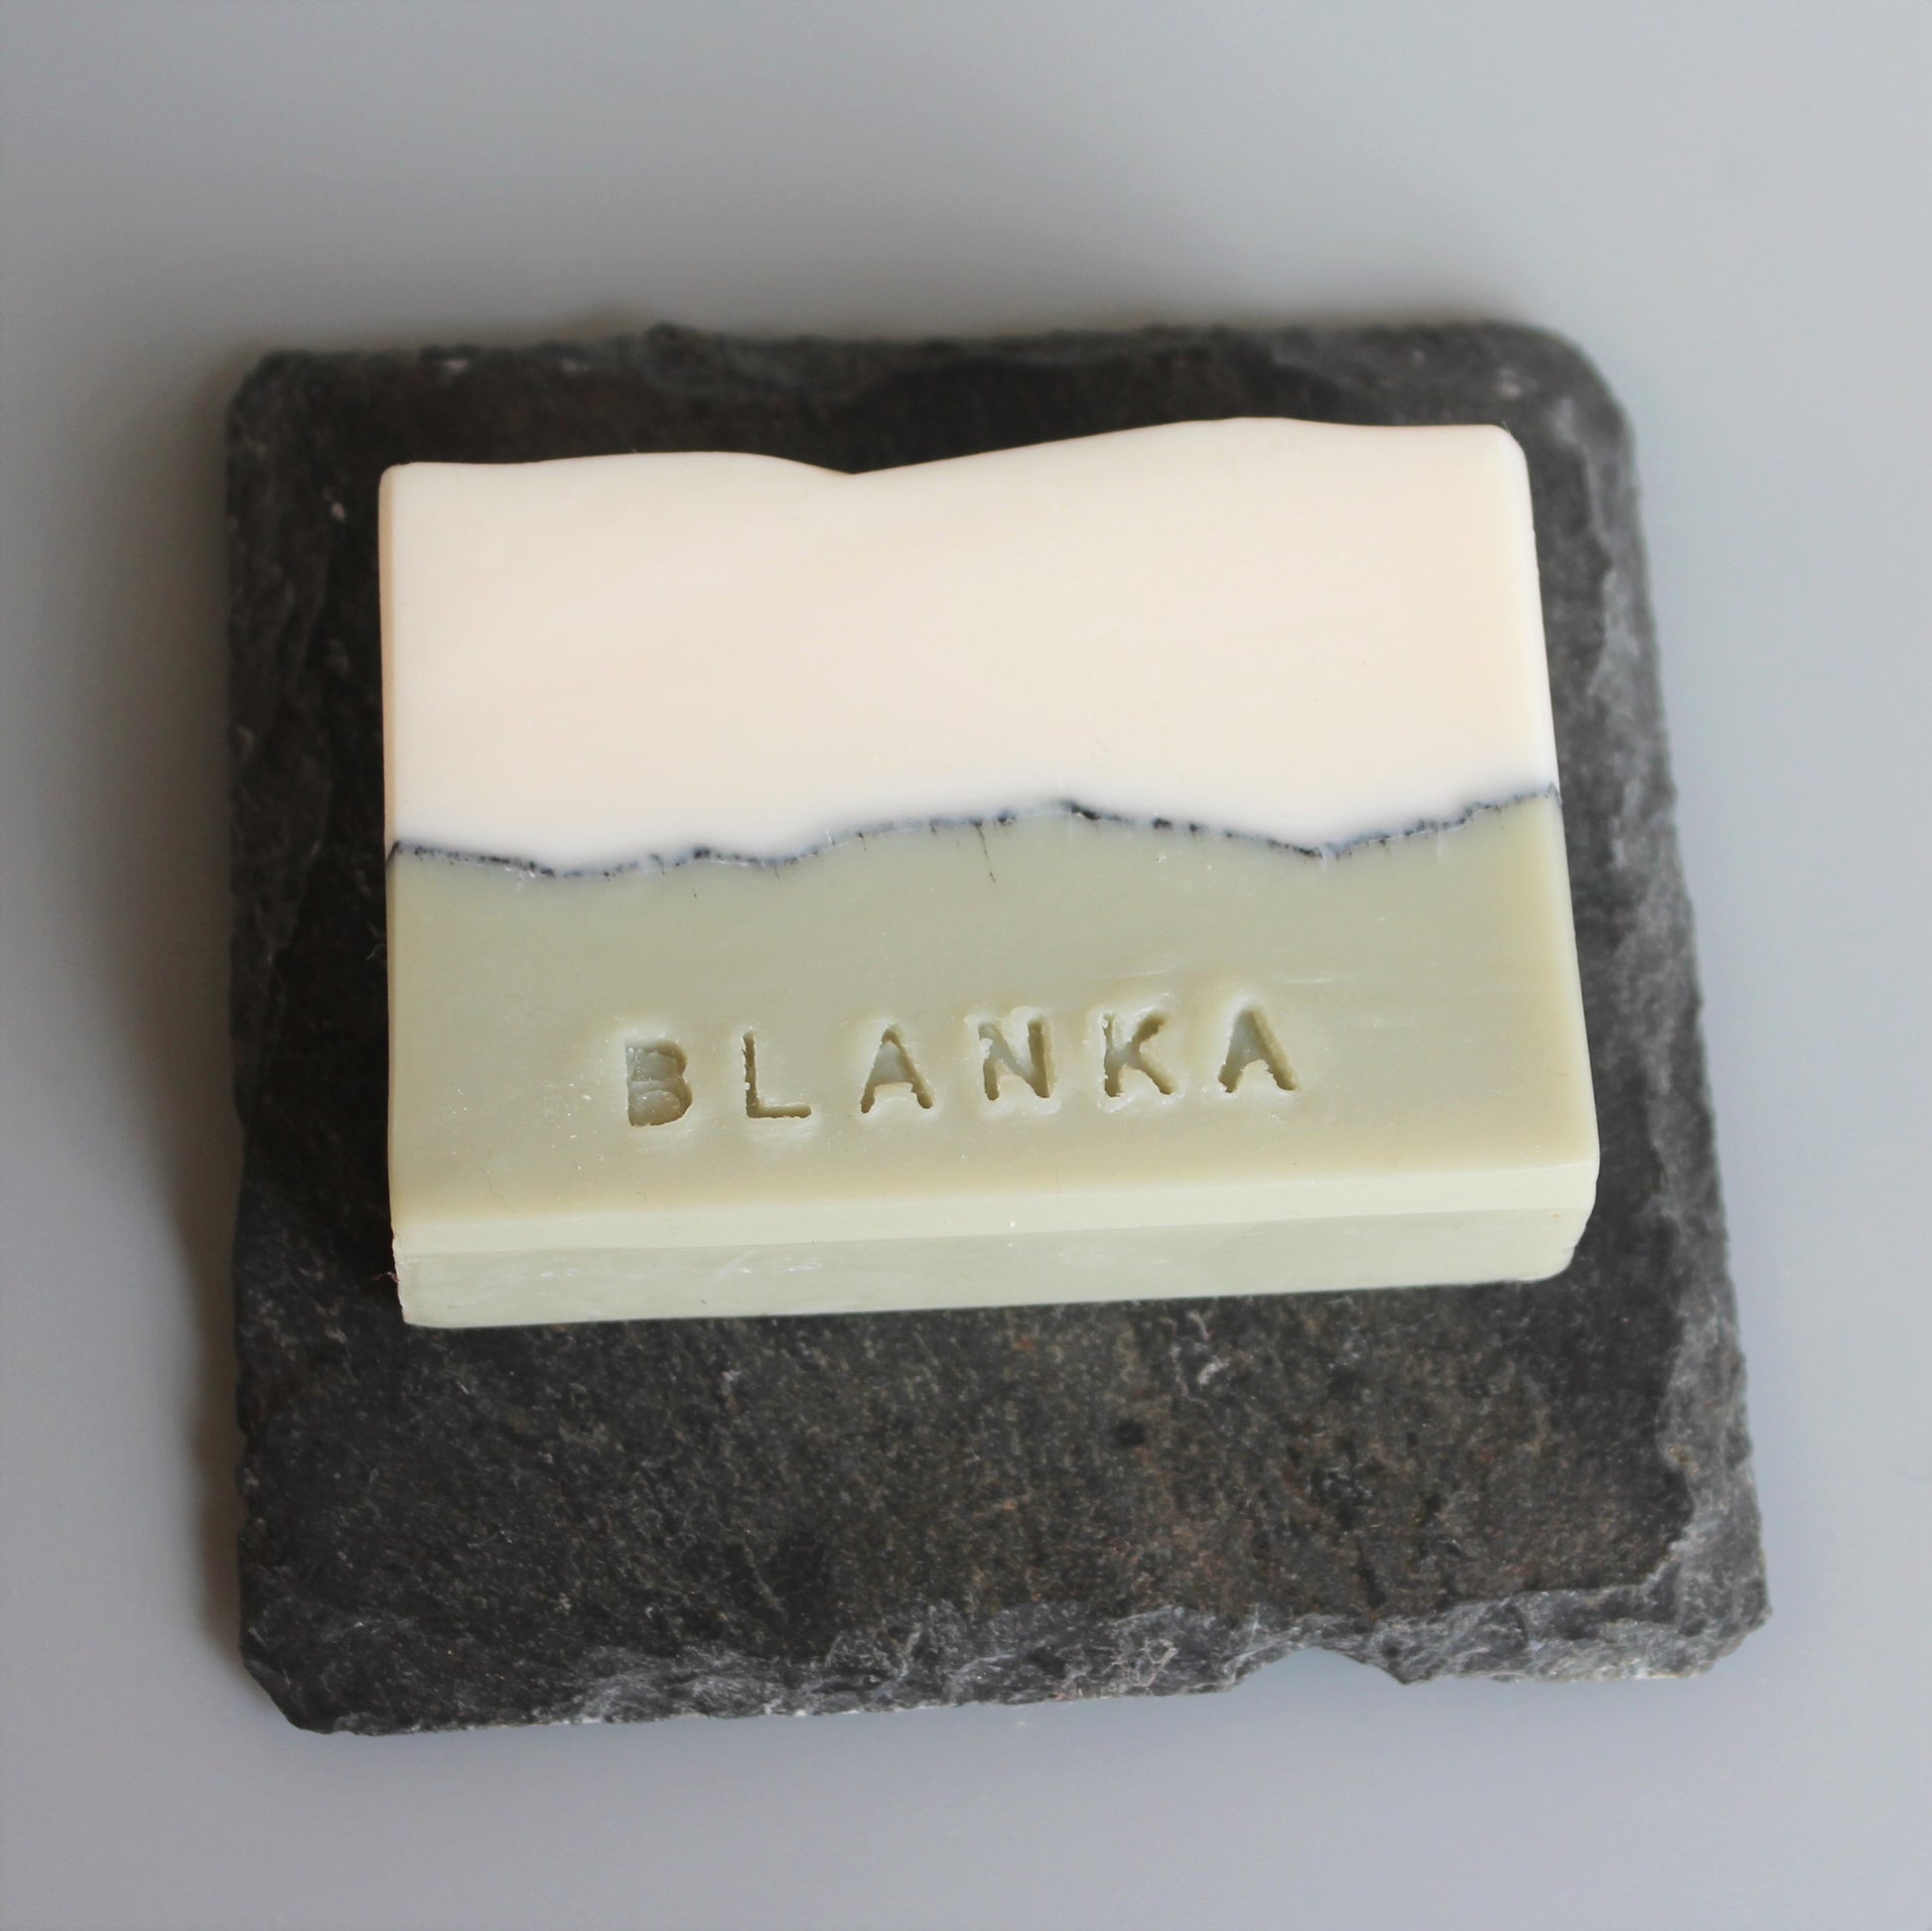 Blanka Artisan Soap Your Neck of The Woods